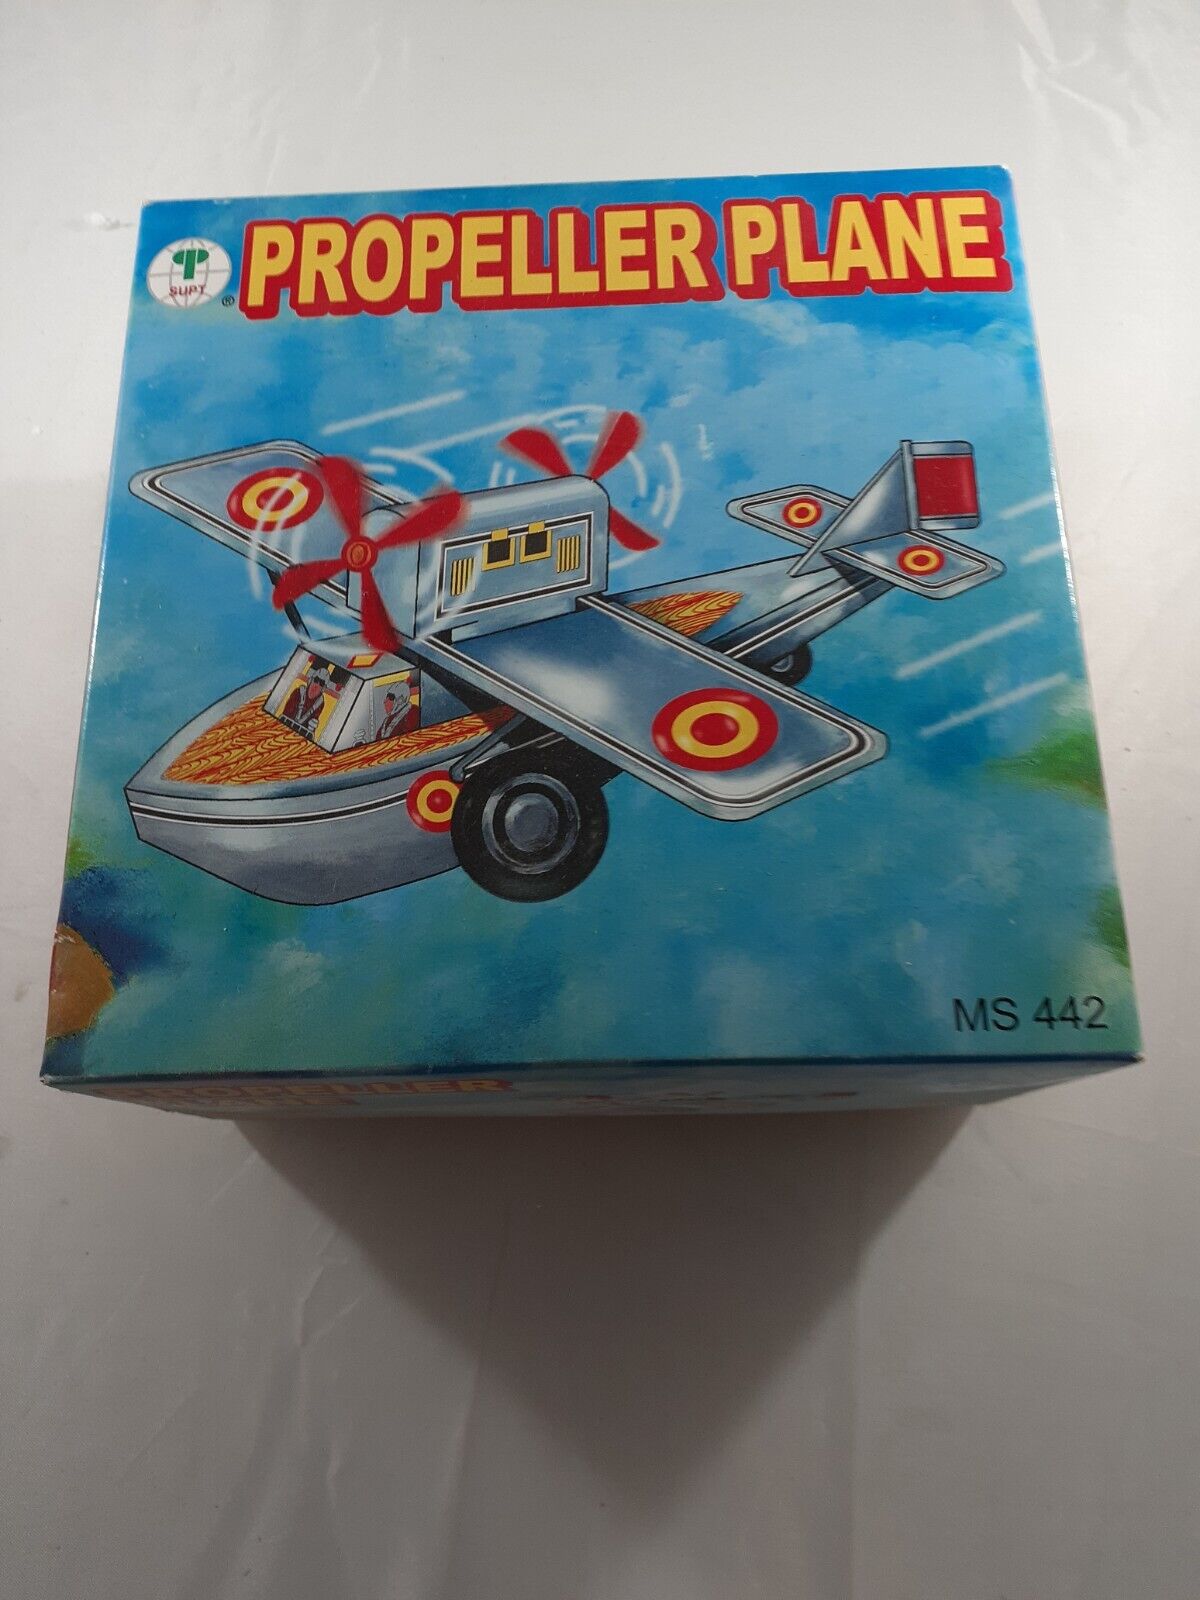 Propeller Plane Airplane Aircraft Replica Tin Toy Ms442 Wind-up Key